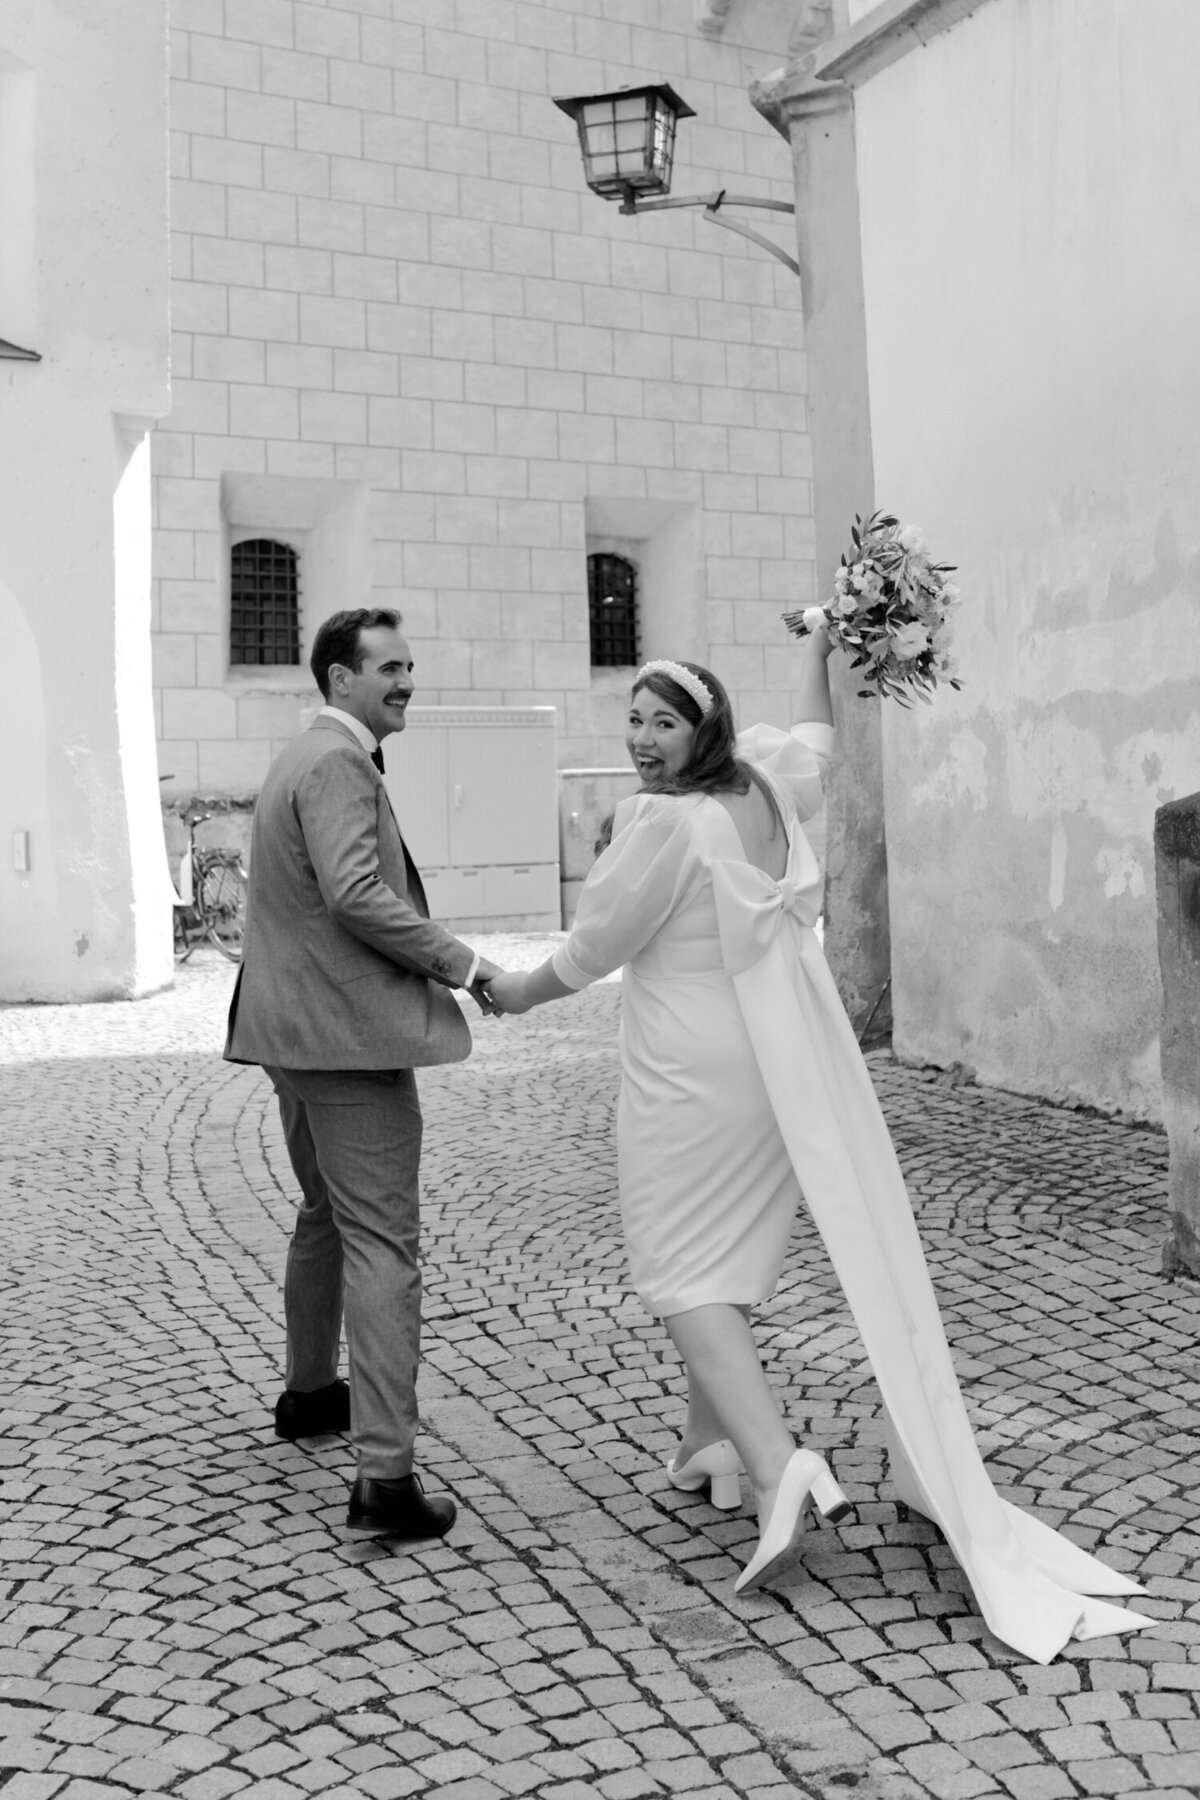 051_Flora_And_Grace_Europe_Editorial_Wedding_Photographer-0-57_An elegant wedding in Italy with a fashion edge and refined floral design.